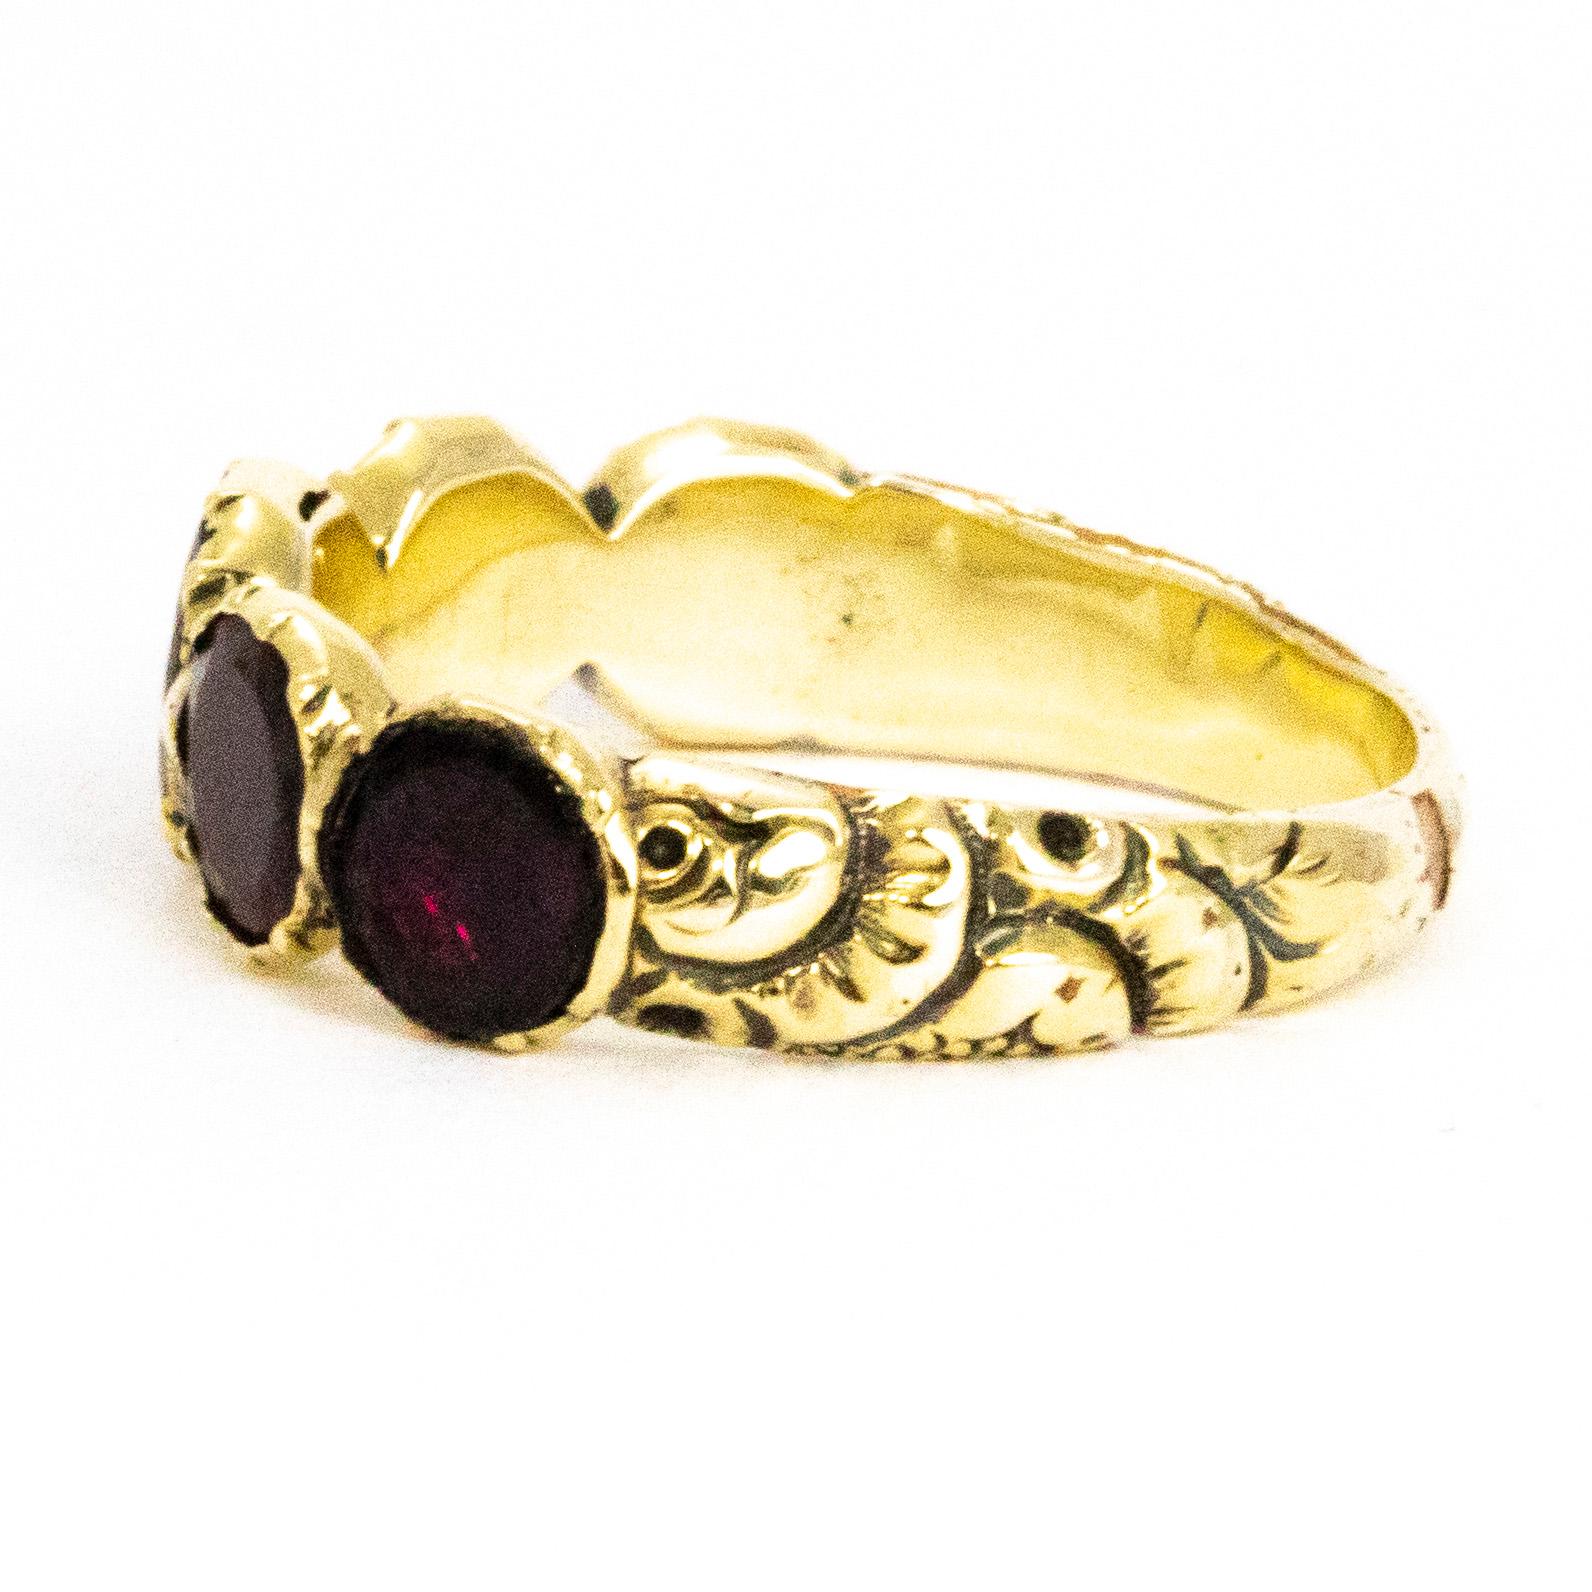 The gorgeous georgian flat cut garnets in this band are a wonderful large size. When wearing the band it has a lovely chunky look to it and also looks as though it could be a full eternity band. The shoulders are actually exquisitely engraved and